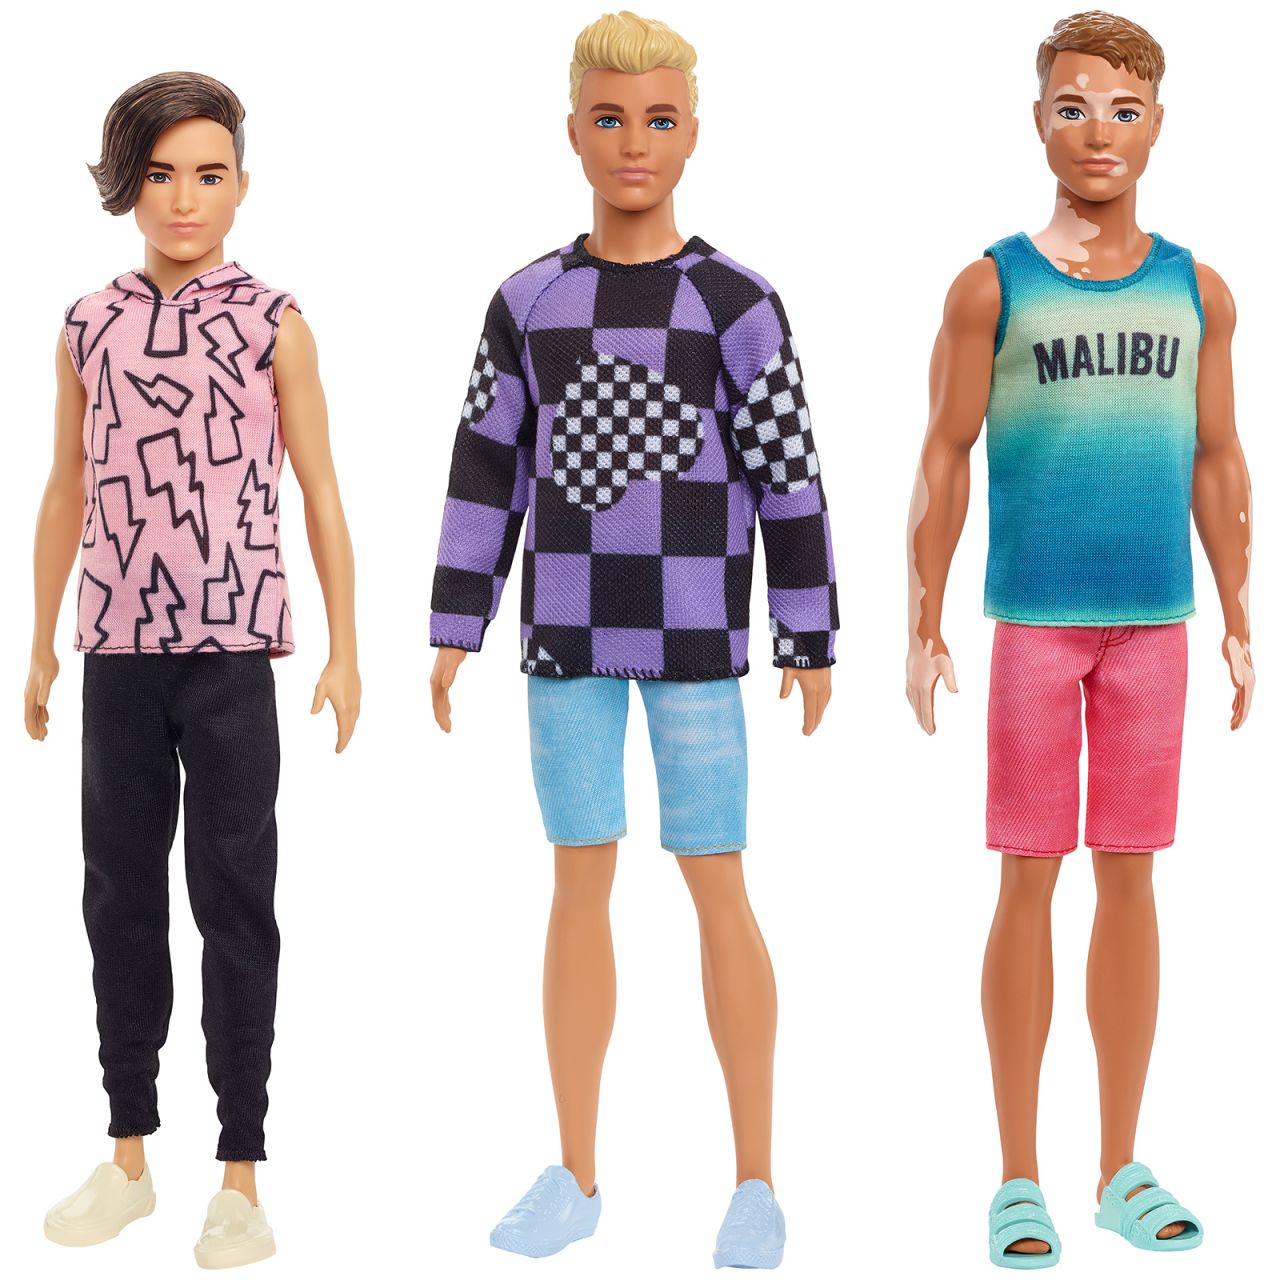 Male Barbie dolls will now be sold in less muscular body types.